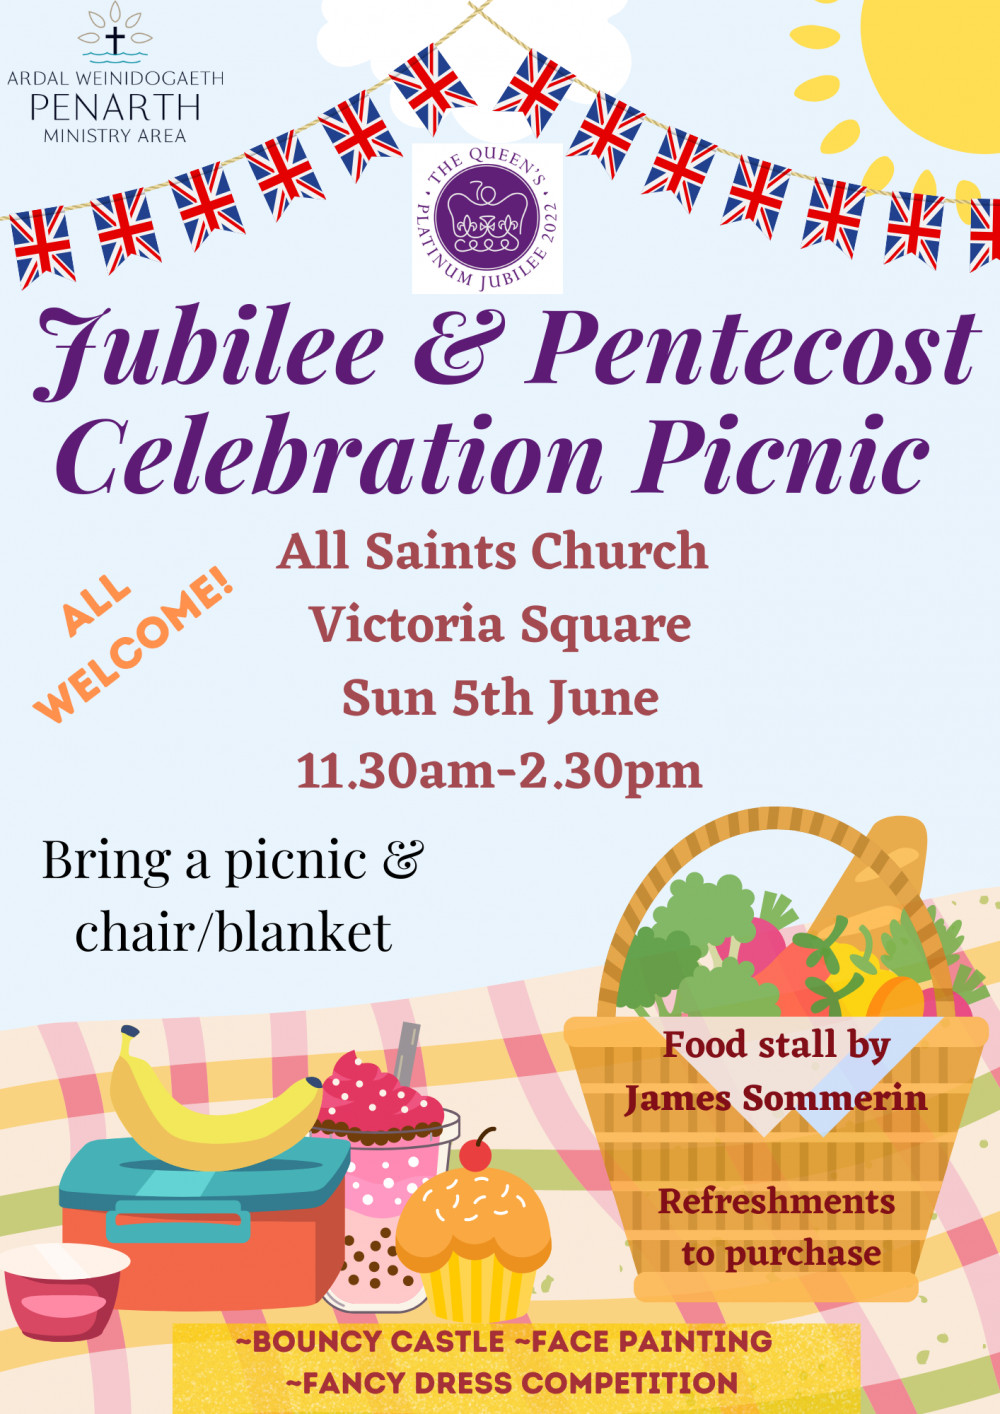 A Jubilee and Pentecost picnic at All Saints Church in Victoria Square in Penarth. (Image credit: Janet Akers - Penarth Ministry Area)